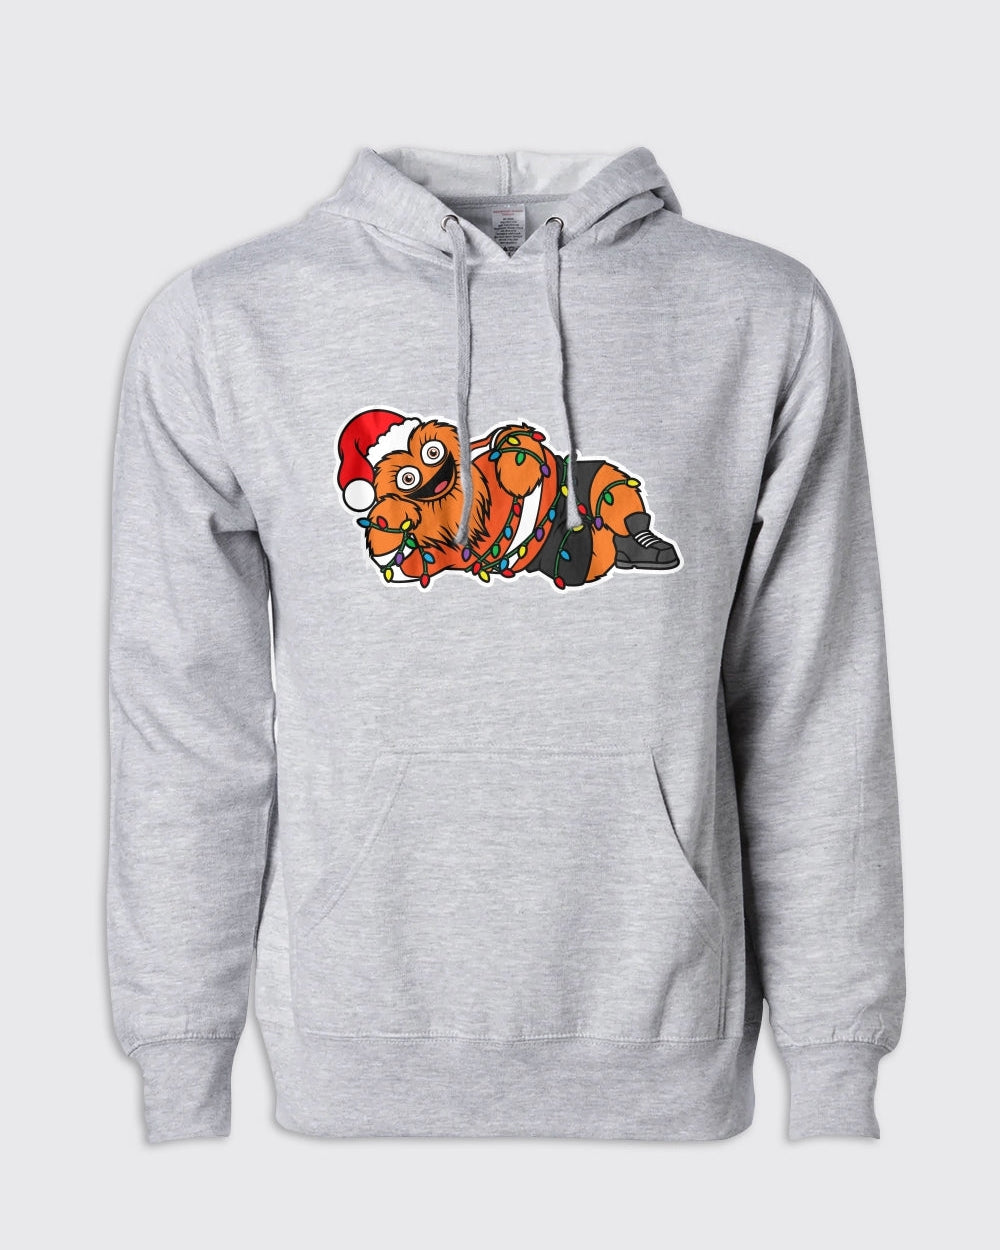 Philadelphia Flyers-Gritty Christmas Hoodie-Grey Heather-Philly Sports Shirts